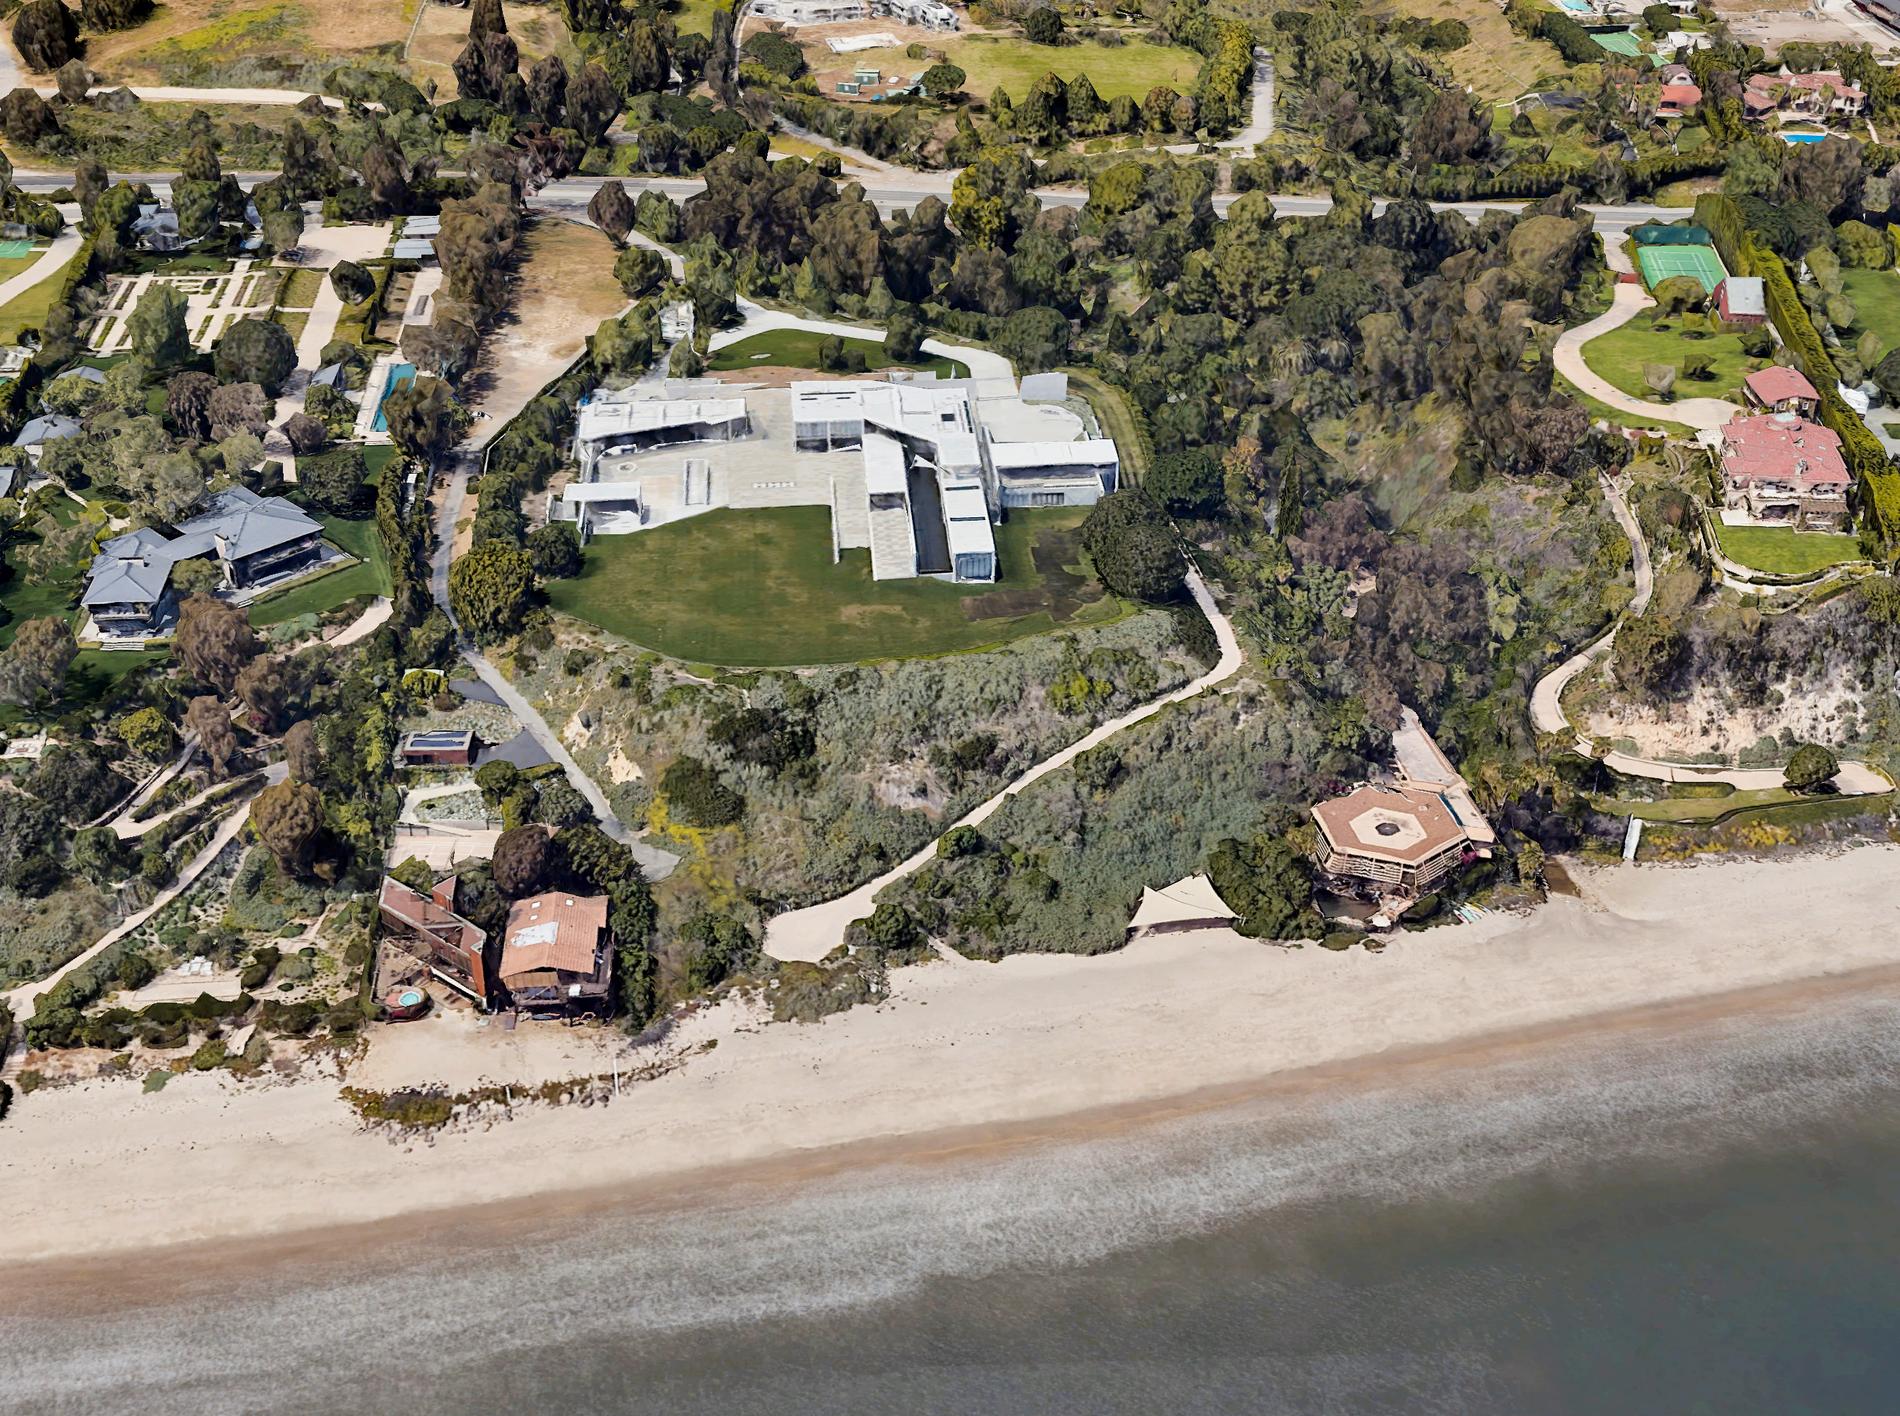 TMZ: Jay-Z and Beyonce just bought the most expensive house ever in California